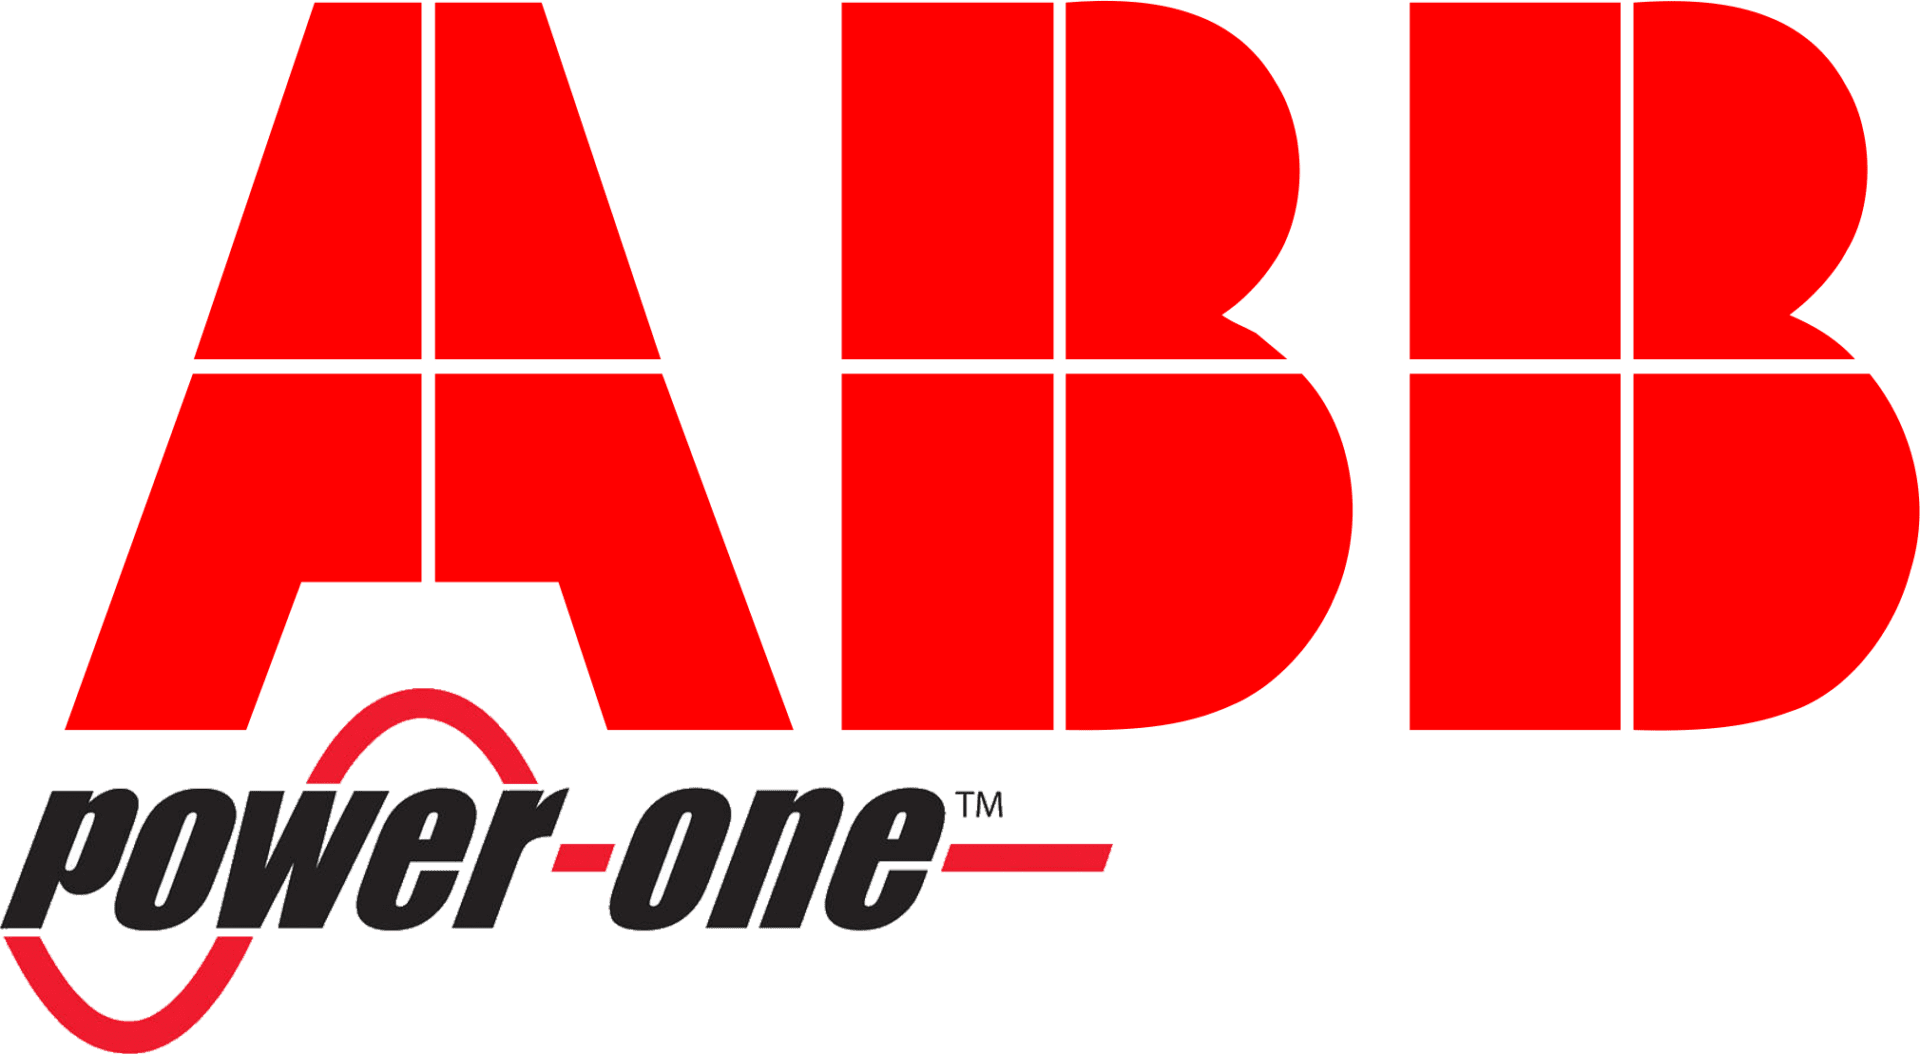 A red and black logo for abl